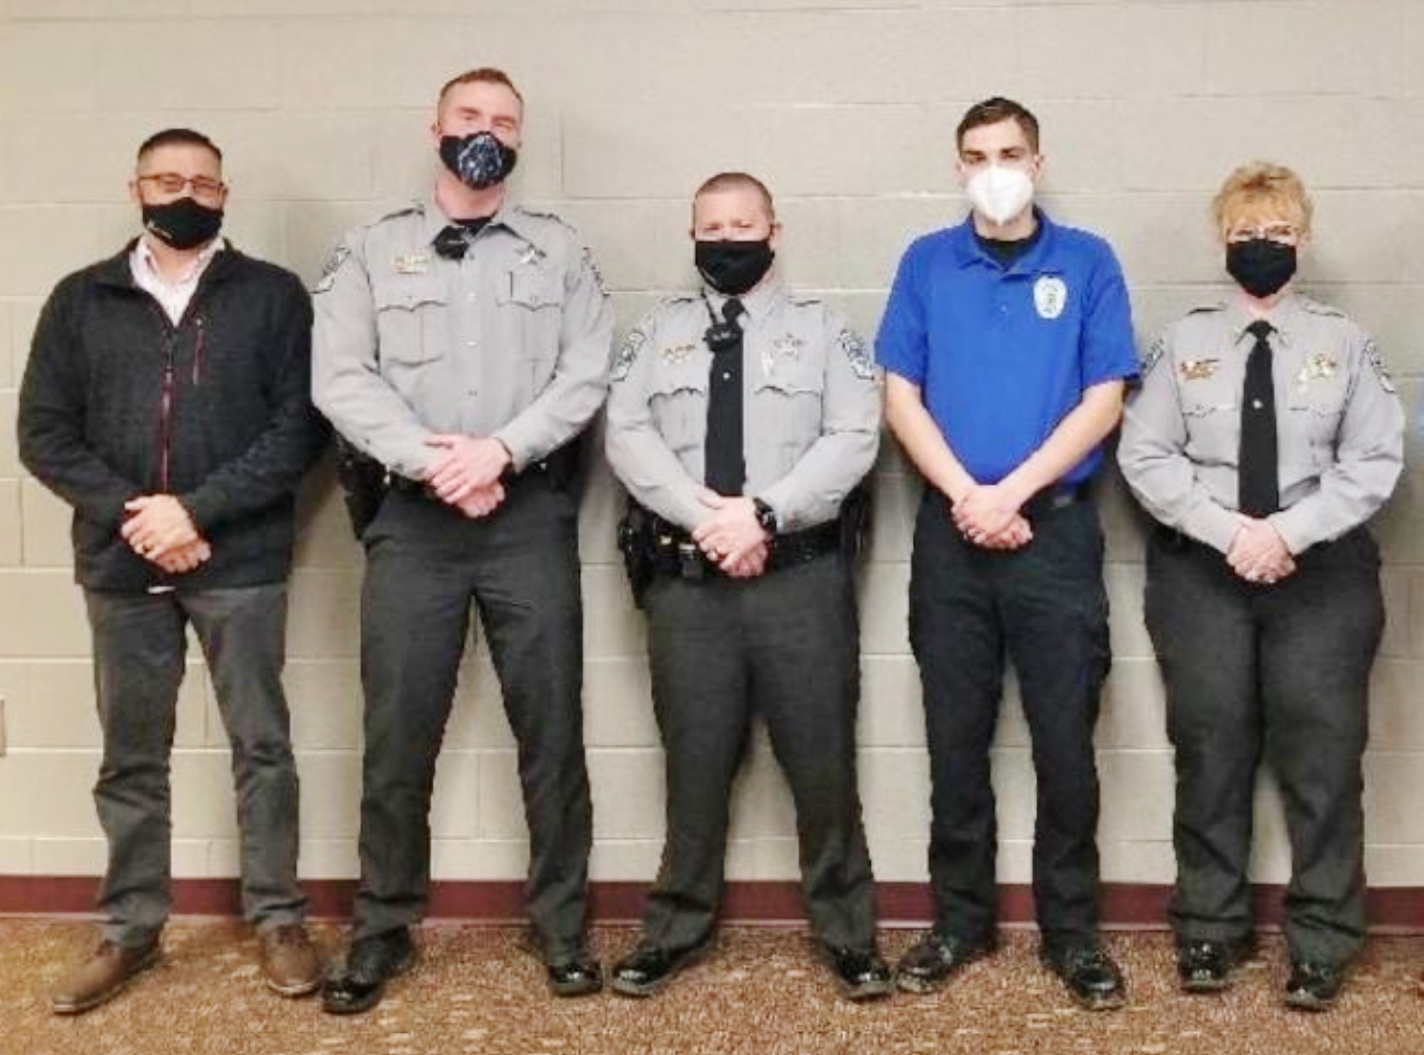 Click to enlarge,  Three individuals have been recognized as the most recent graduates of the Central Carolina Community College Basic Law Enforcement Training program. Pictured are, left to right: CCCC BLET Director Neil Ambrose, Joshua Sammons, Alex Lukasewycz, Connor Brogan, and Captain Tammy Kirkman of the Chatham County Sheriff's Office. 